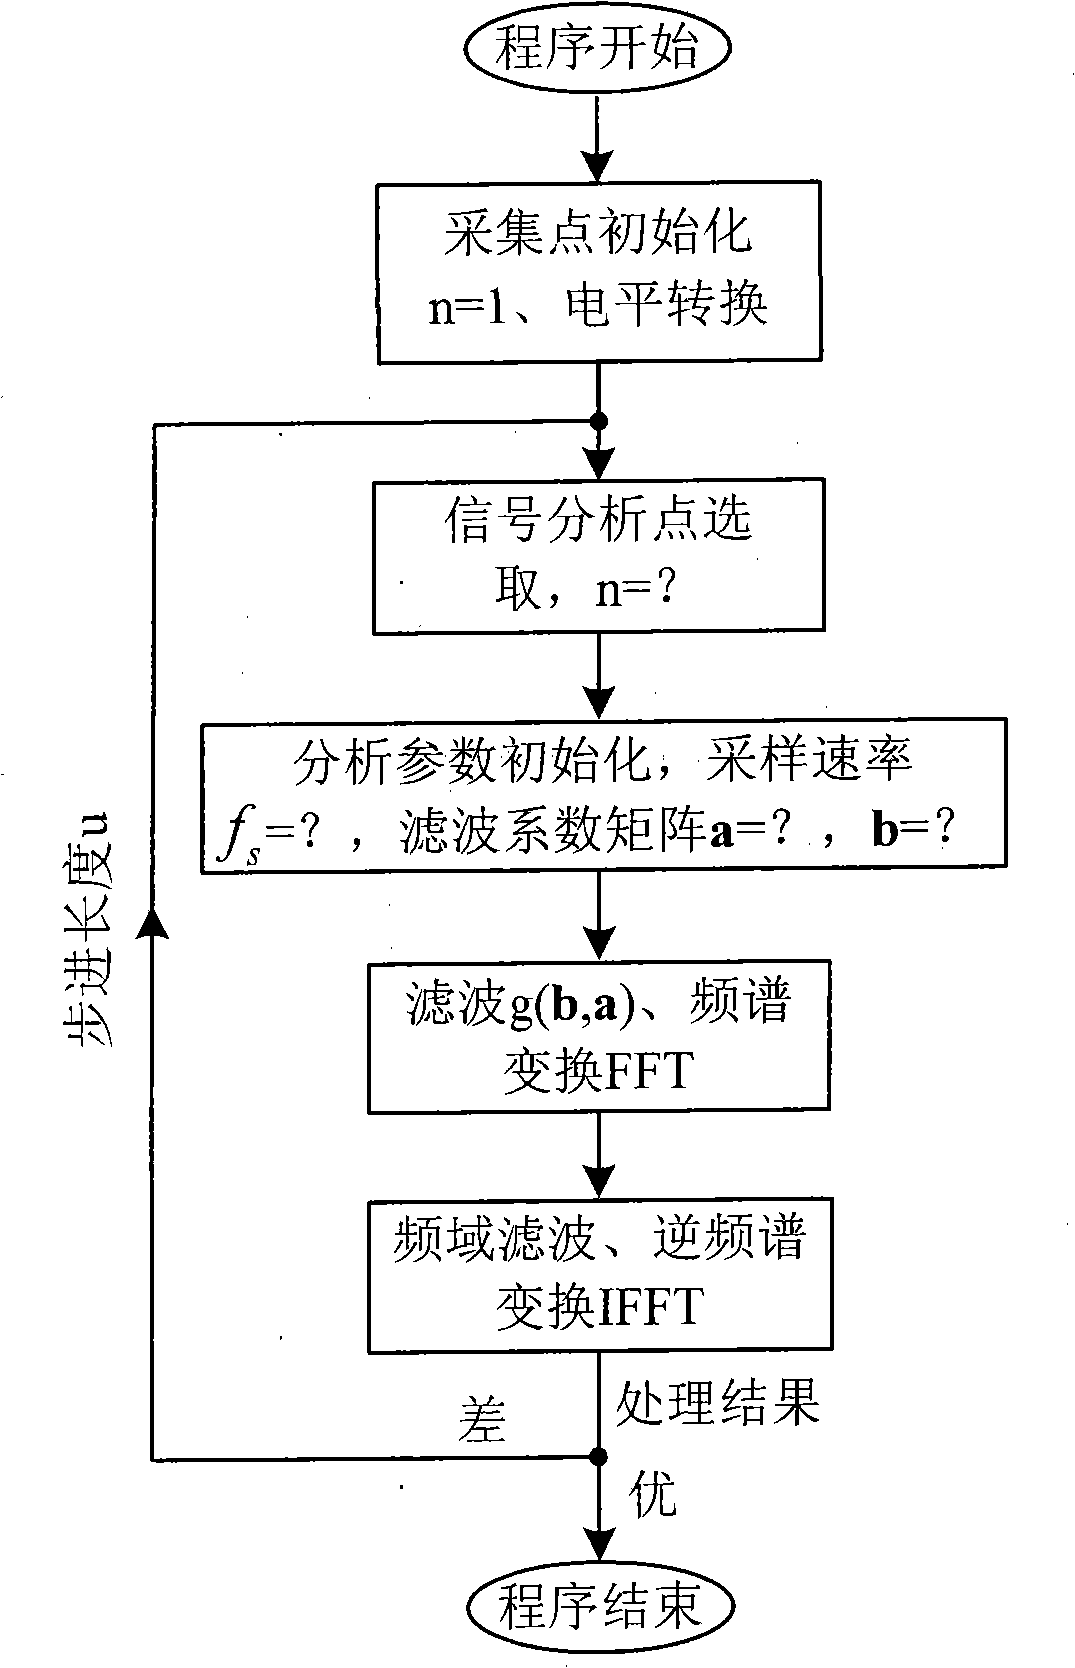 Method for detecting weak low frequency signal form unknown strong frequency conversion signal